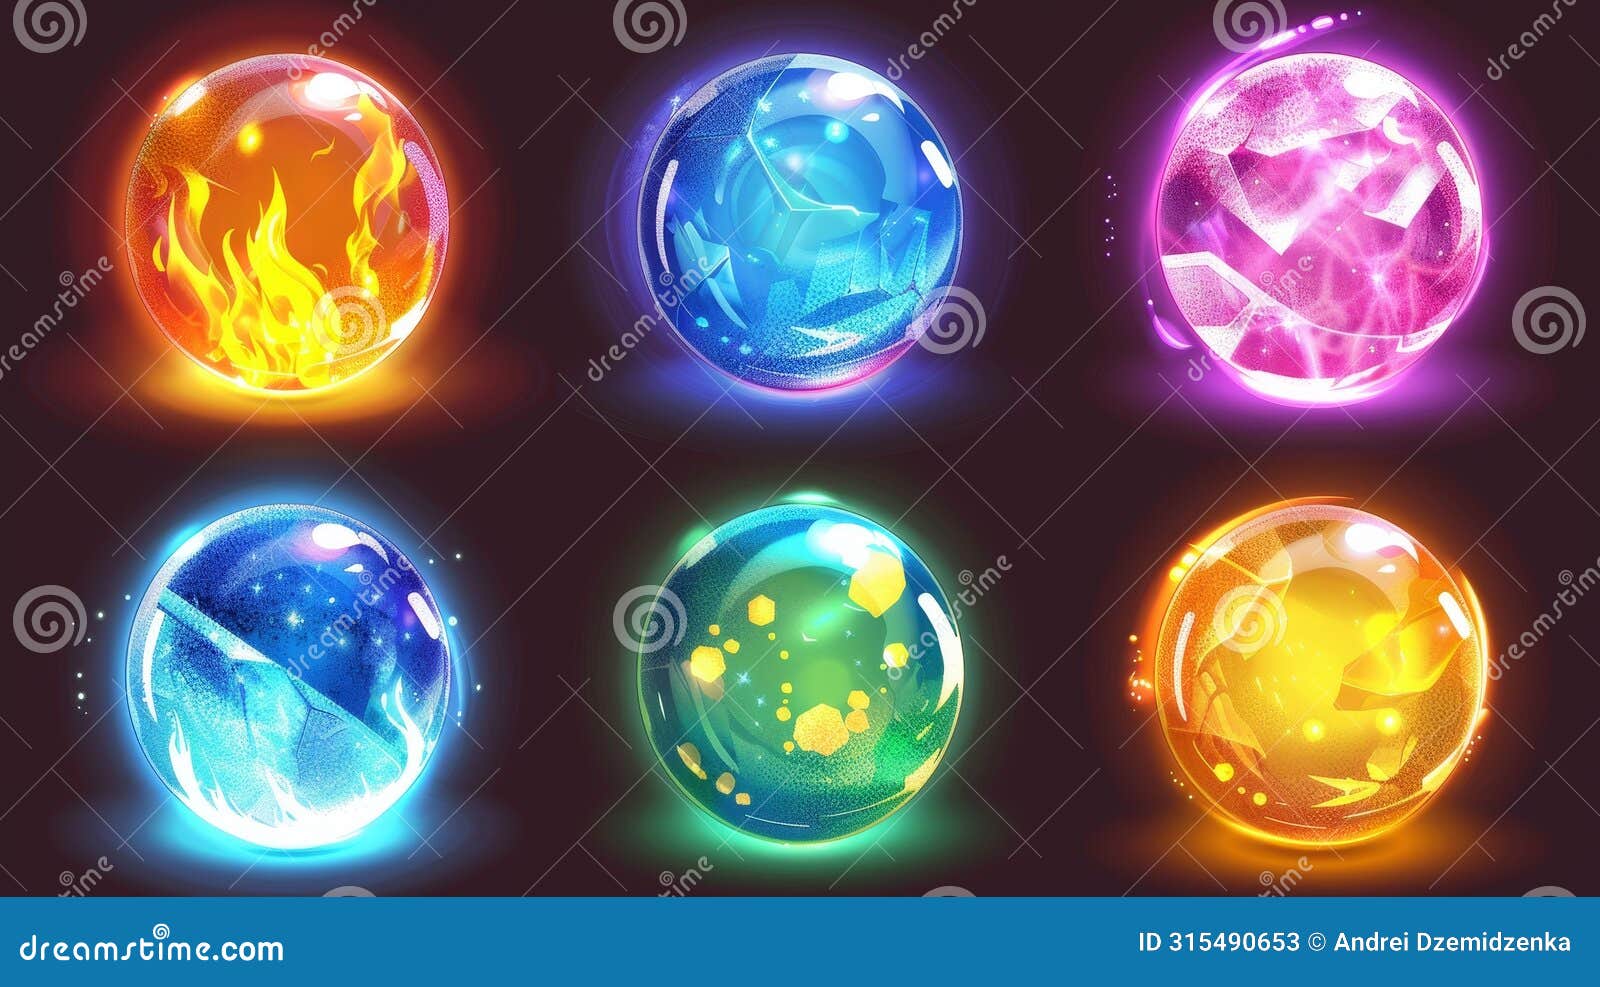 an  magic prophecy sphere modern icon. a glowing crystal ball of energy for fantasy game objects. the circle